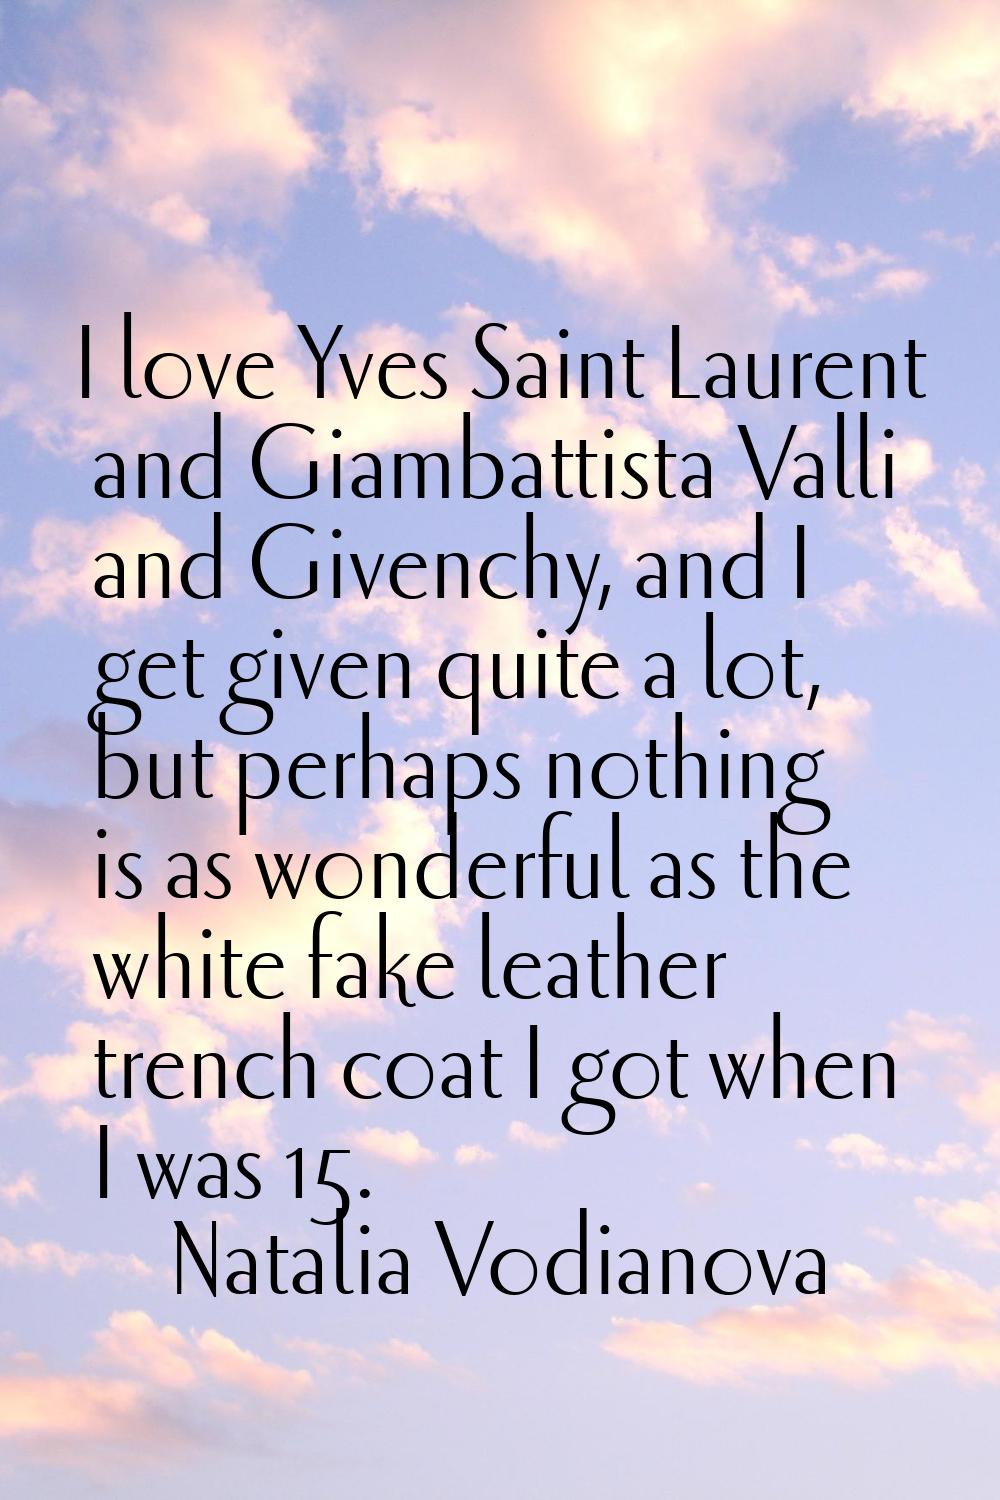 I love Yves Saint Laurent and Giambattista Valli and Givenchy, and I get given quite a lot, but per